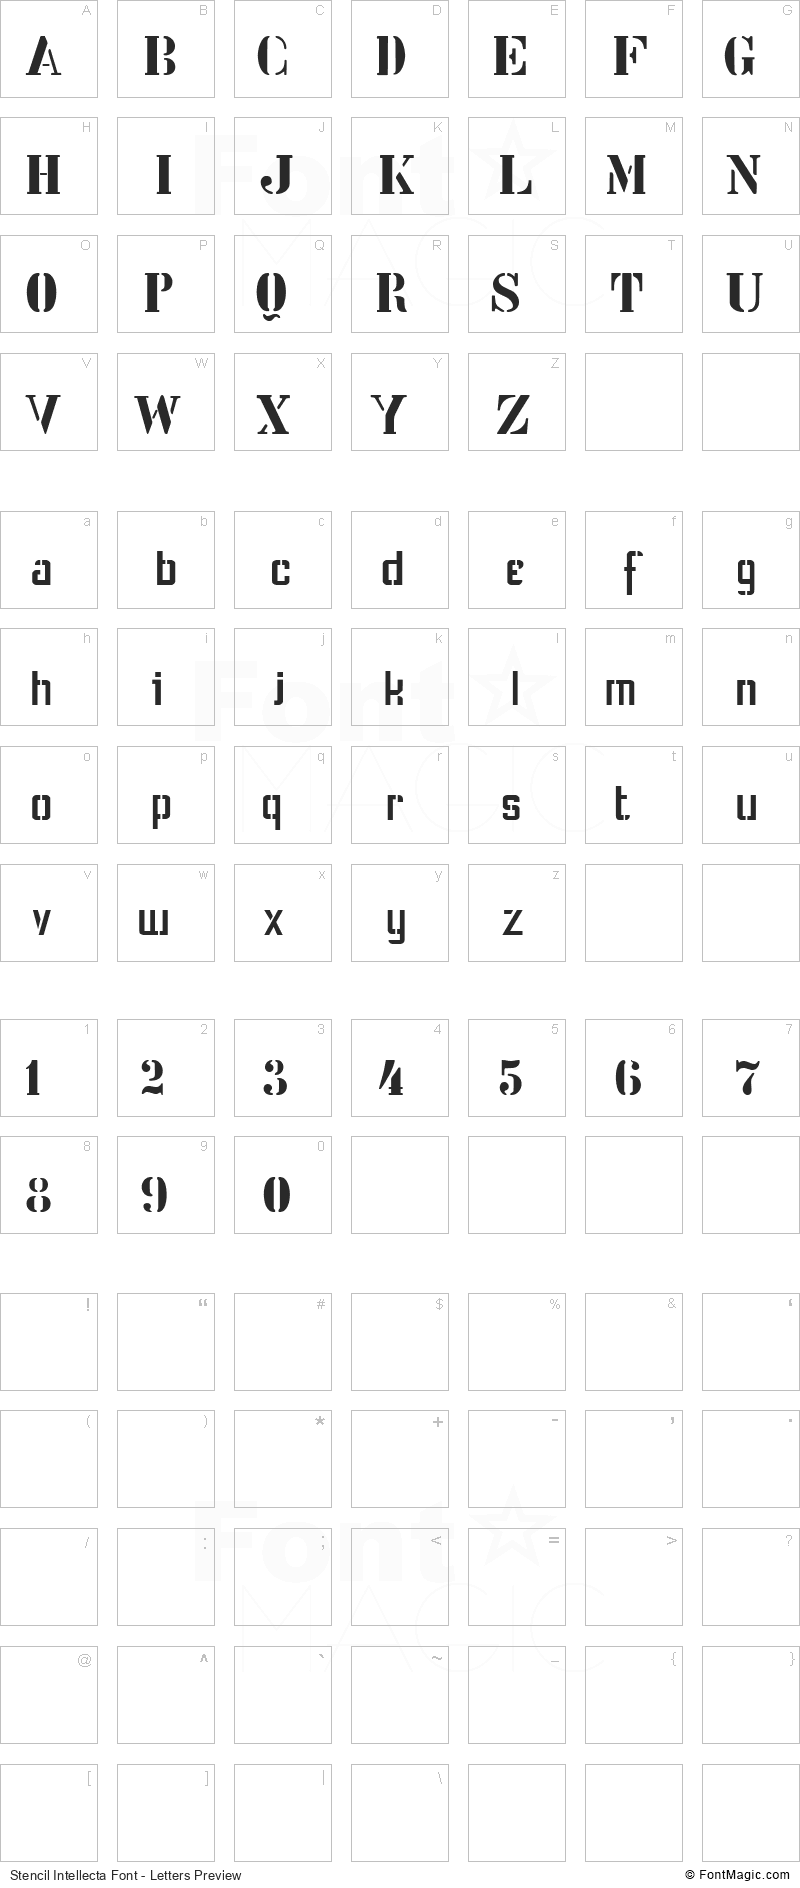 Stencil Intellecta Font - All Latters Preview Chart